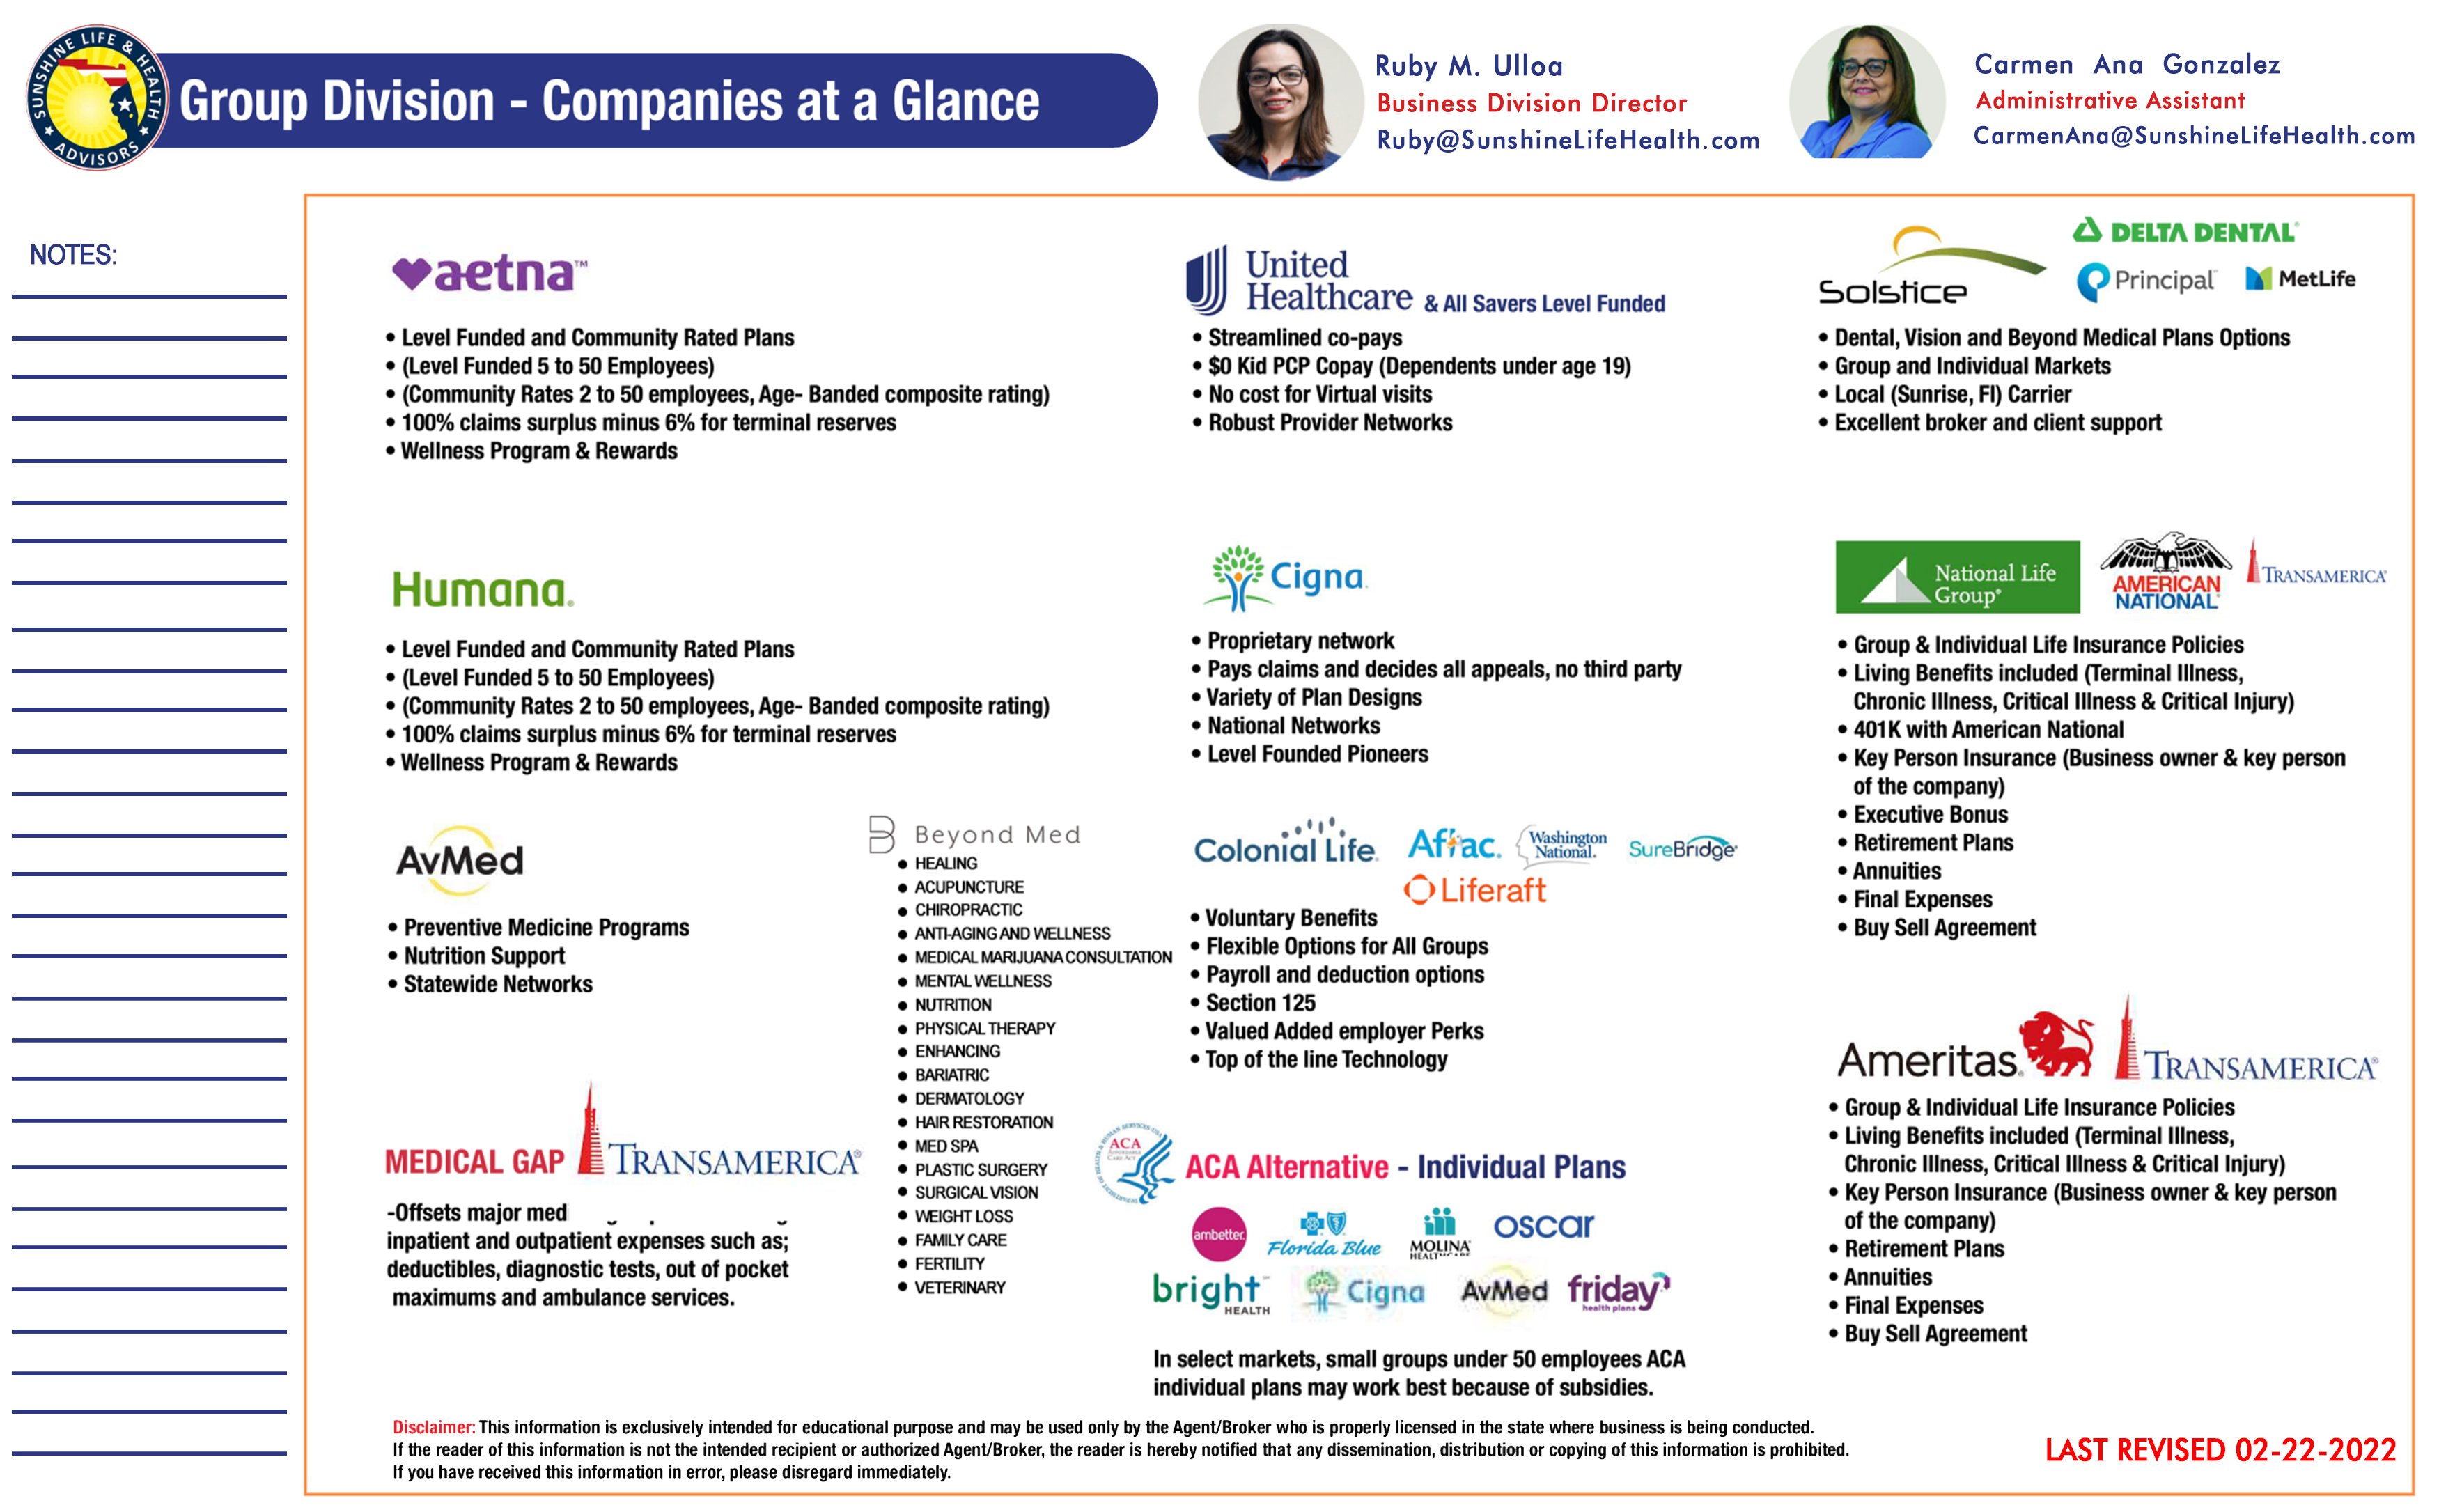 Group Division Companies at Glance 2-22-22.pdf_Page_2